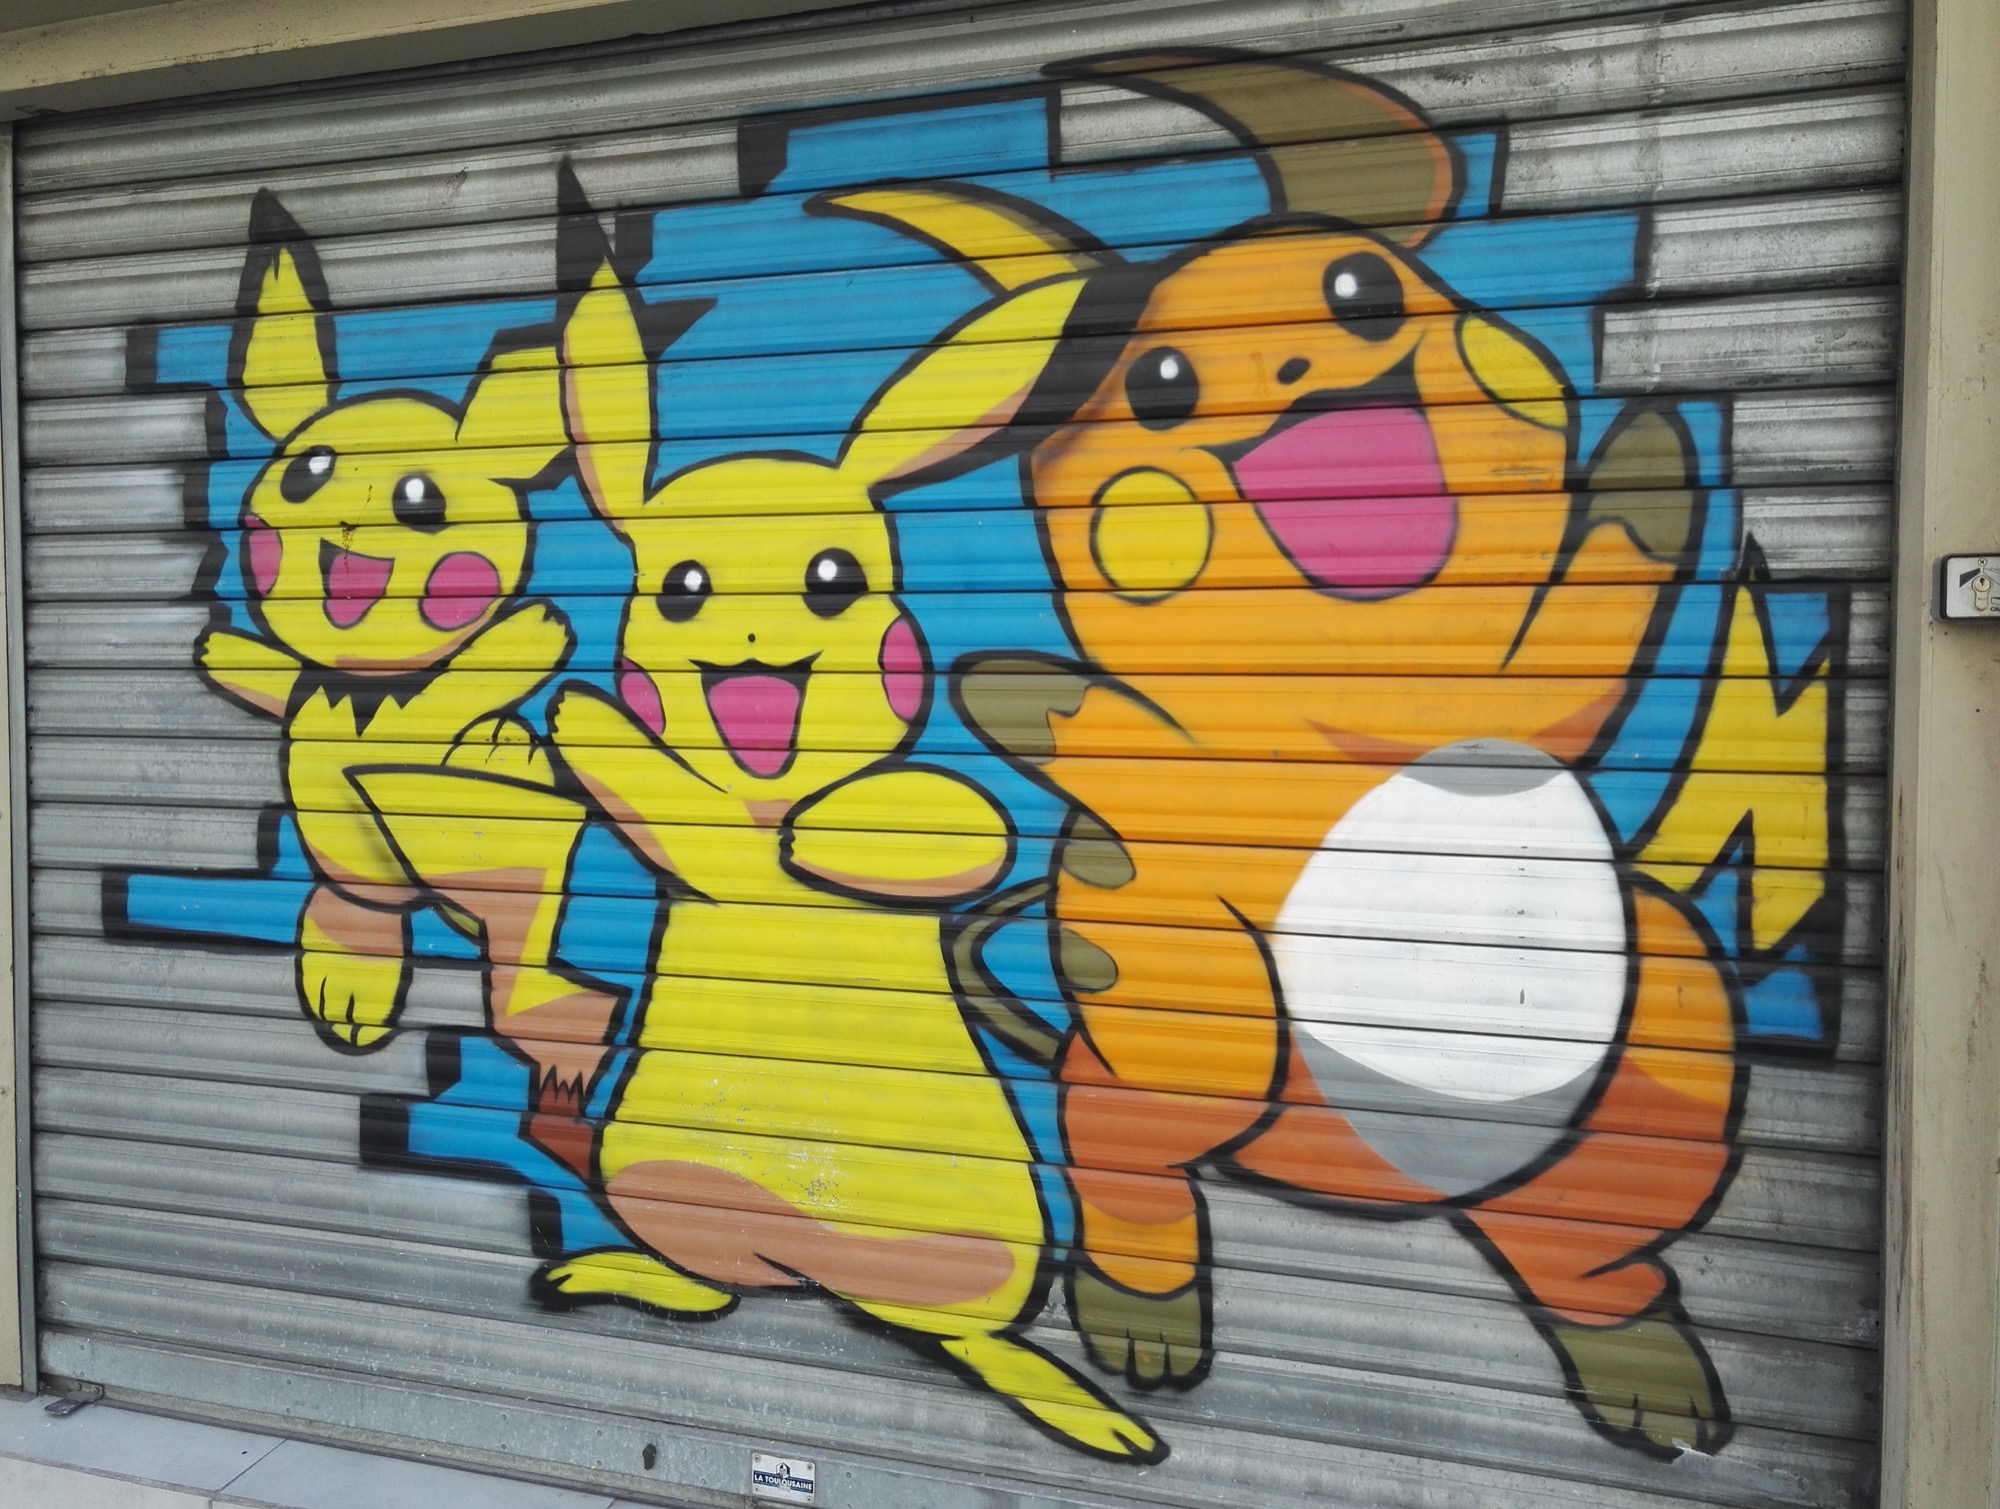 Graffiti 98 Pikachu family captured by Rabot in Bourges France